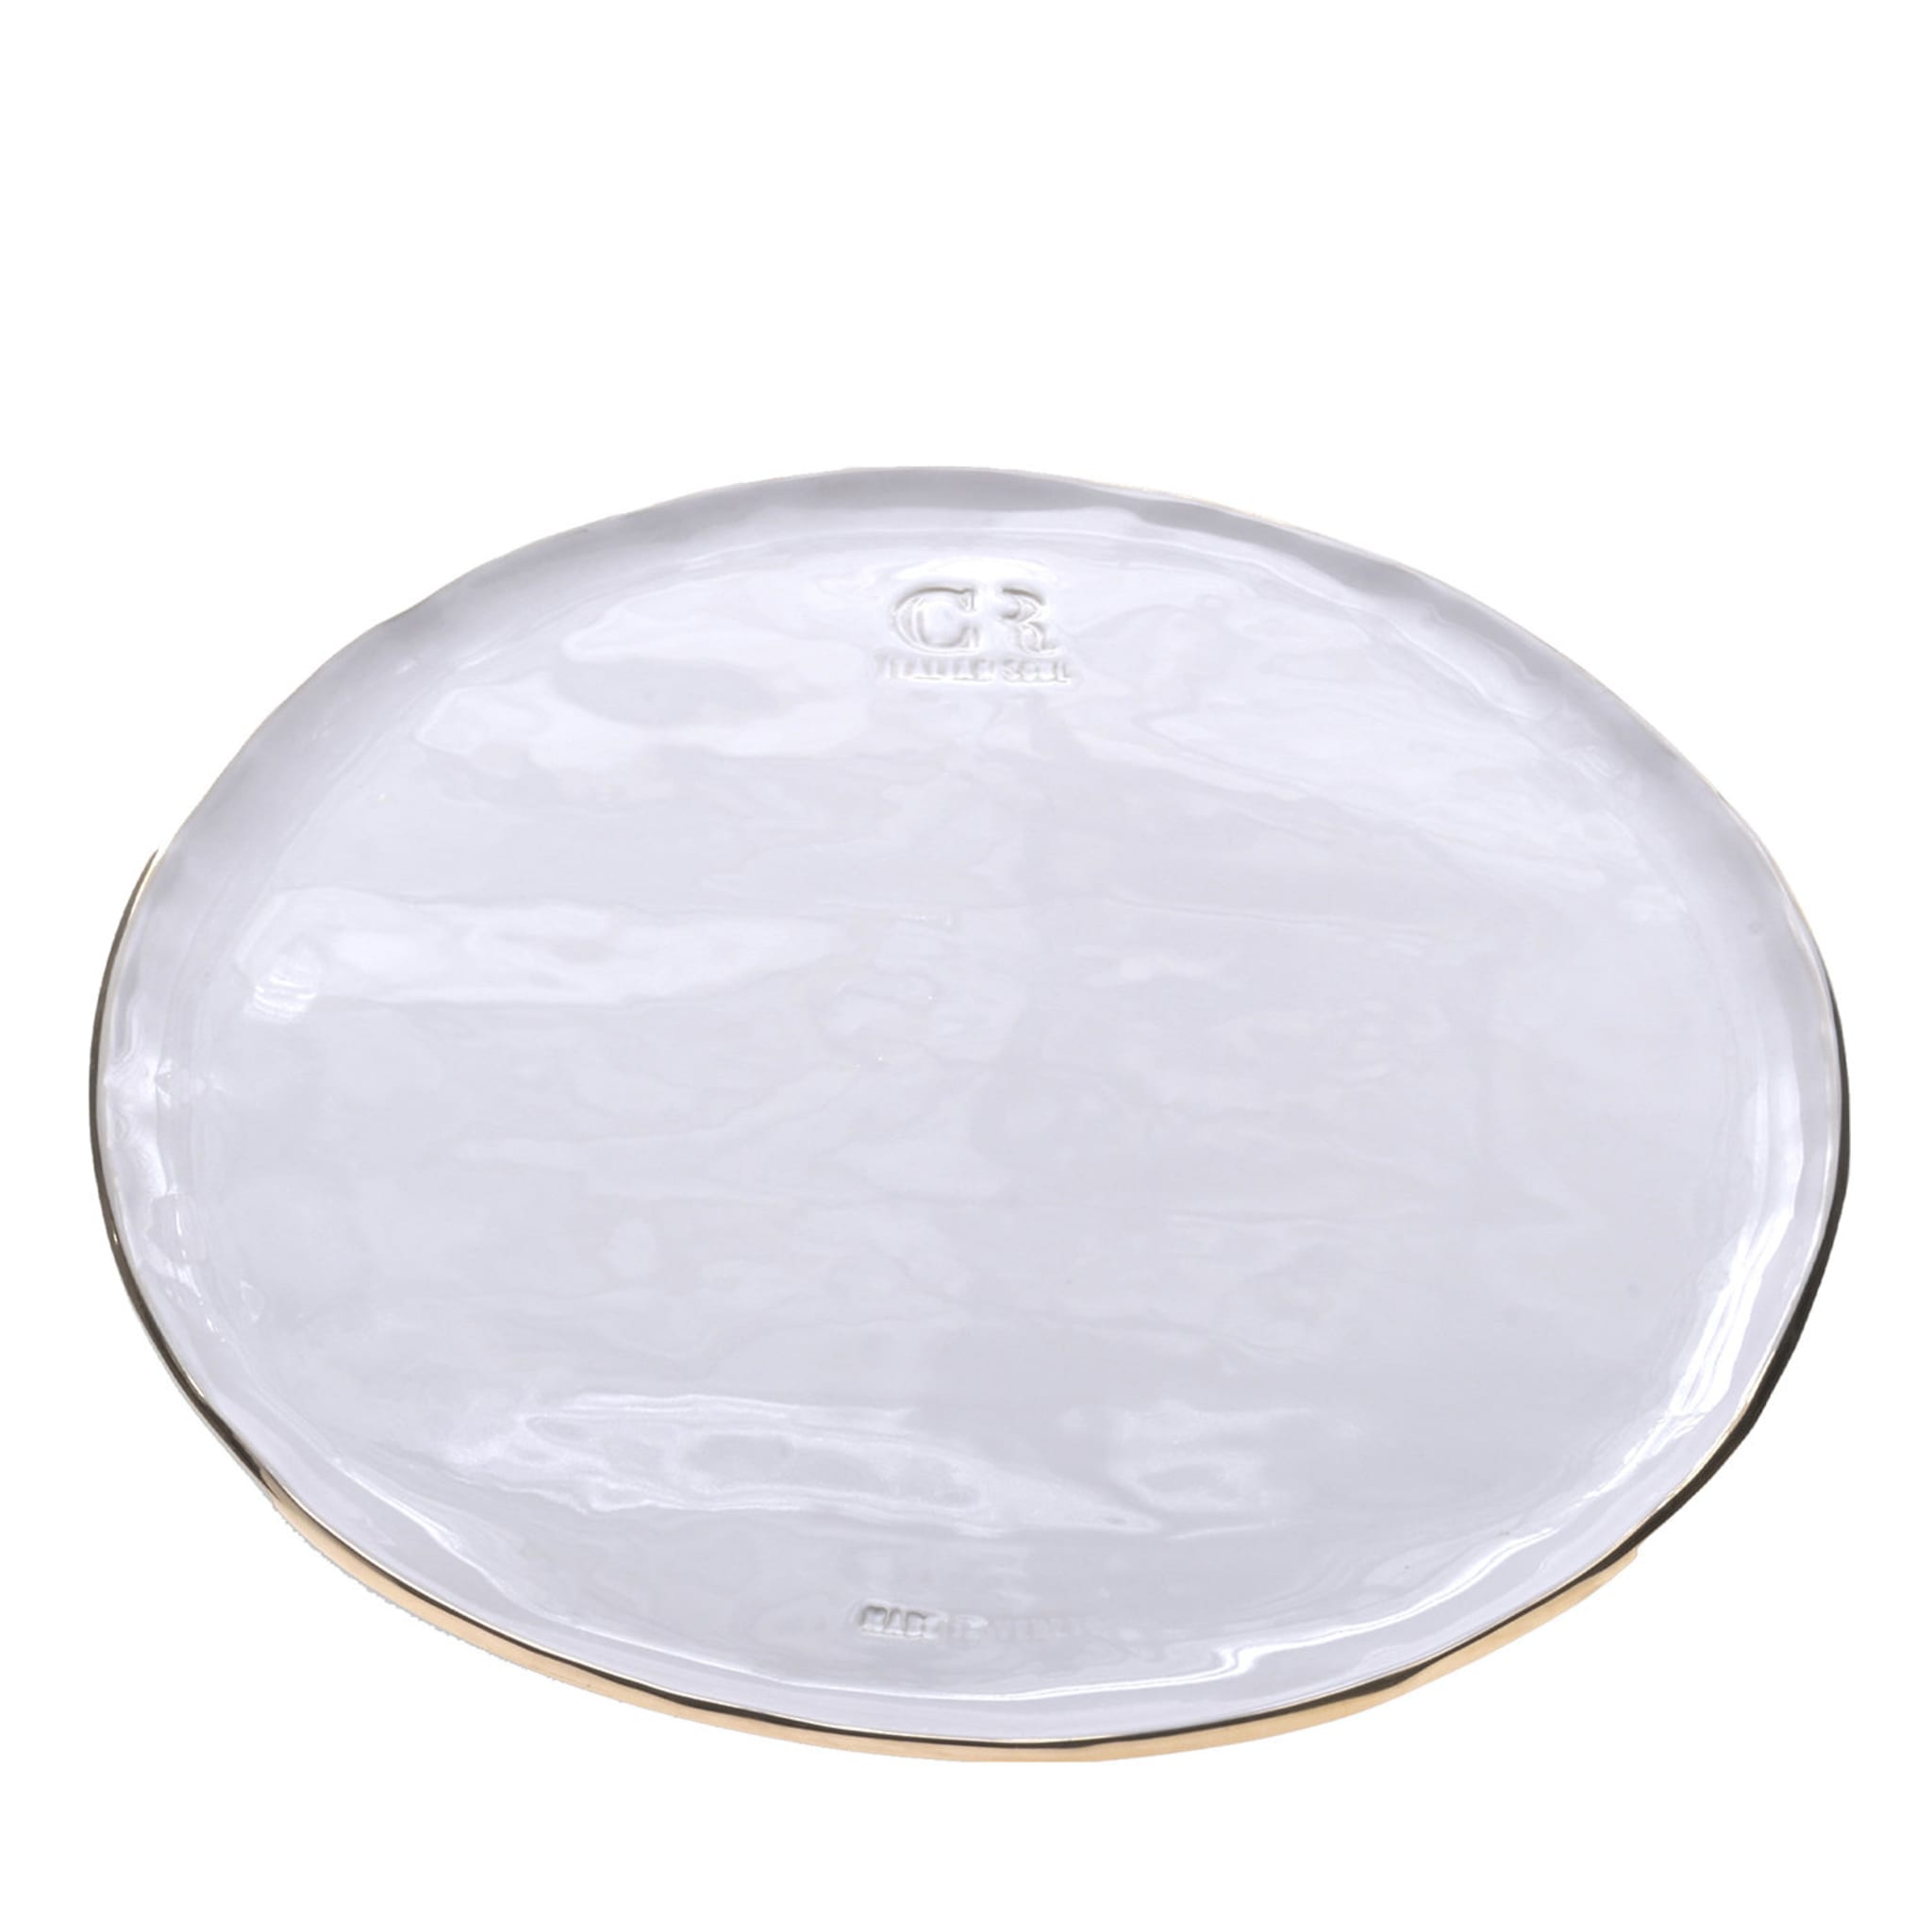 Set of 2 White Ceramic Platewith Gold Rim - Main view